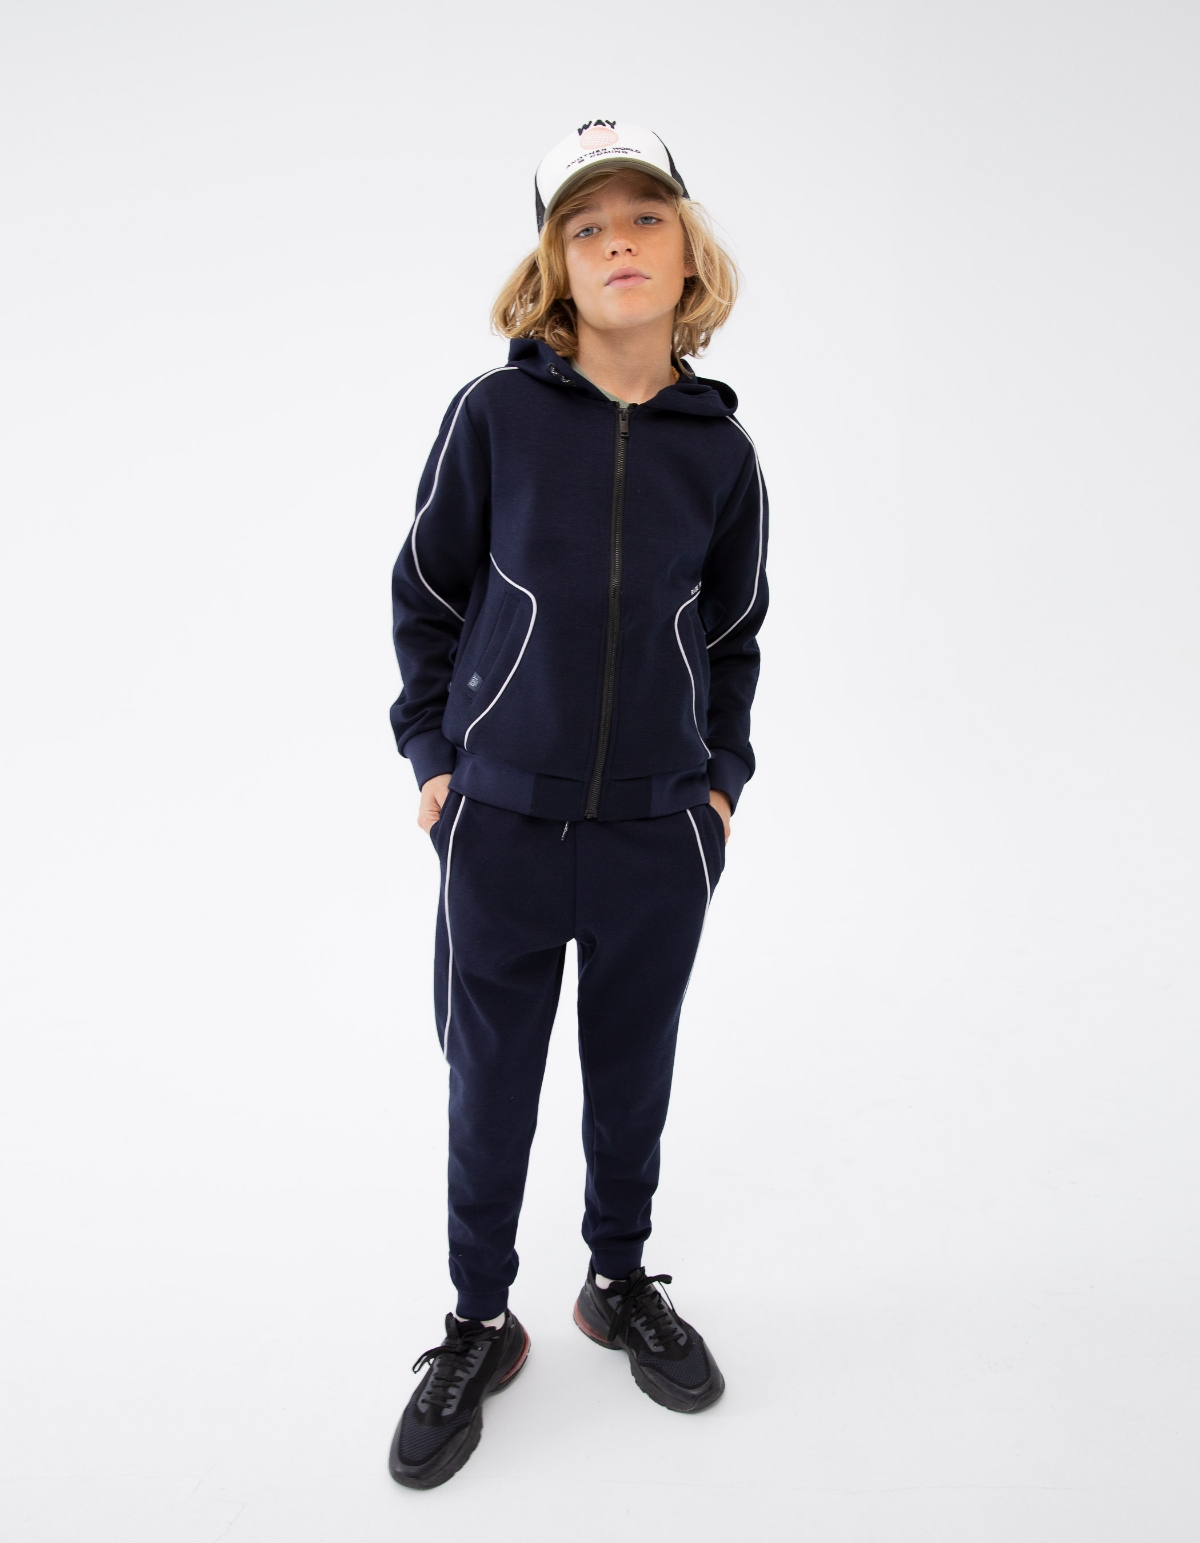 Boys’ navy joggers with white piping